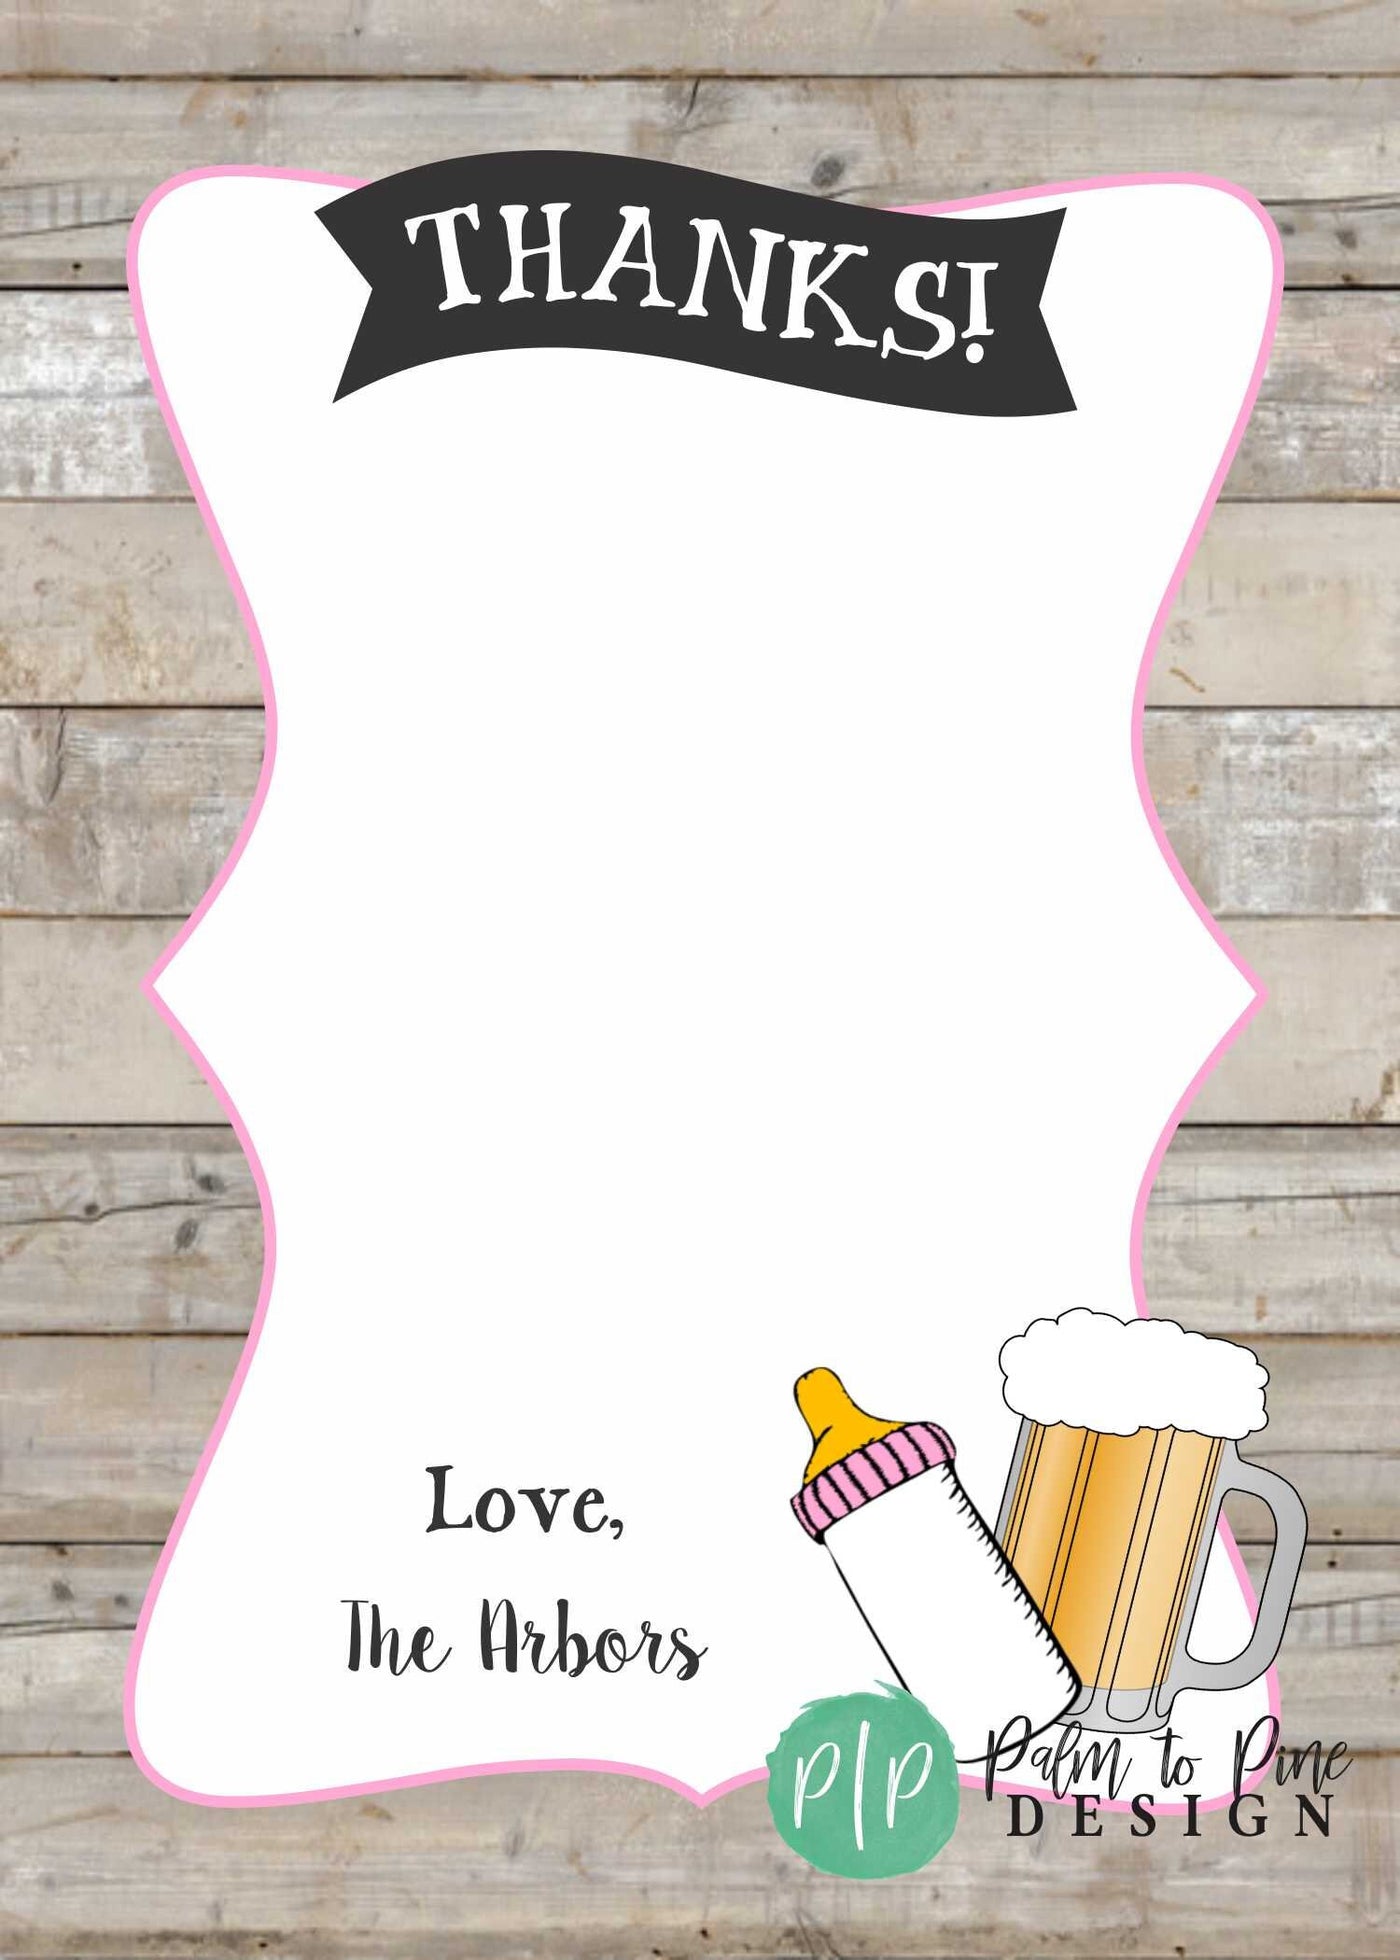 A Baby is Brewing Thank You Card, Beer Baby Shower Thank You Card, Beer Baby Shower, co ed baby shower, co ed baby shower thank you card